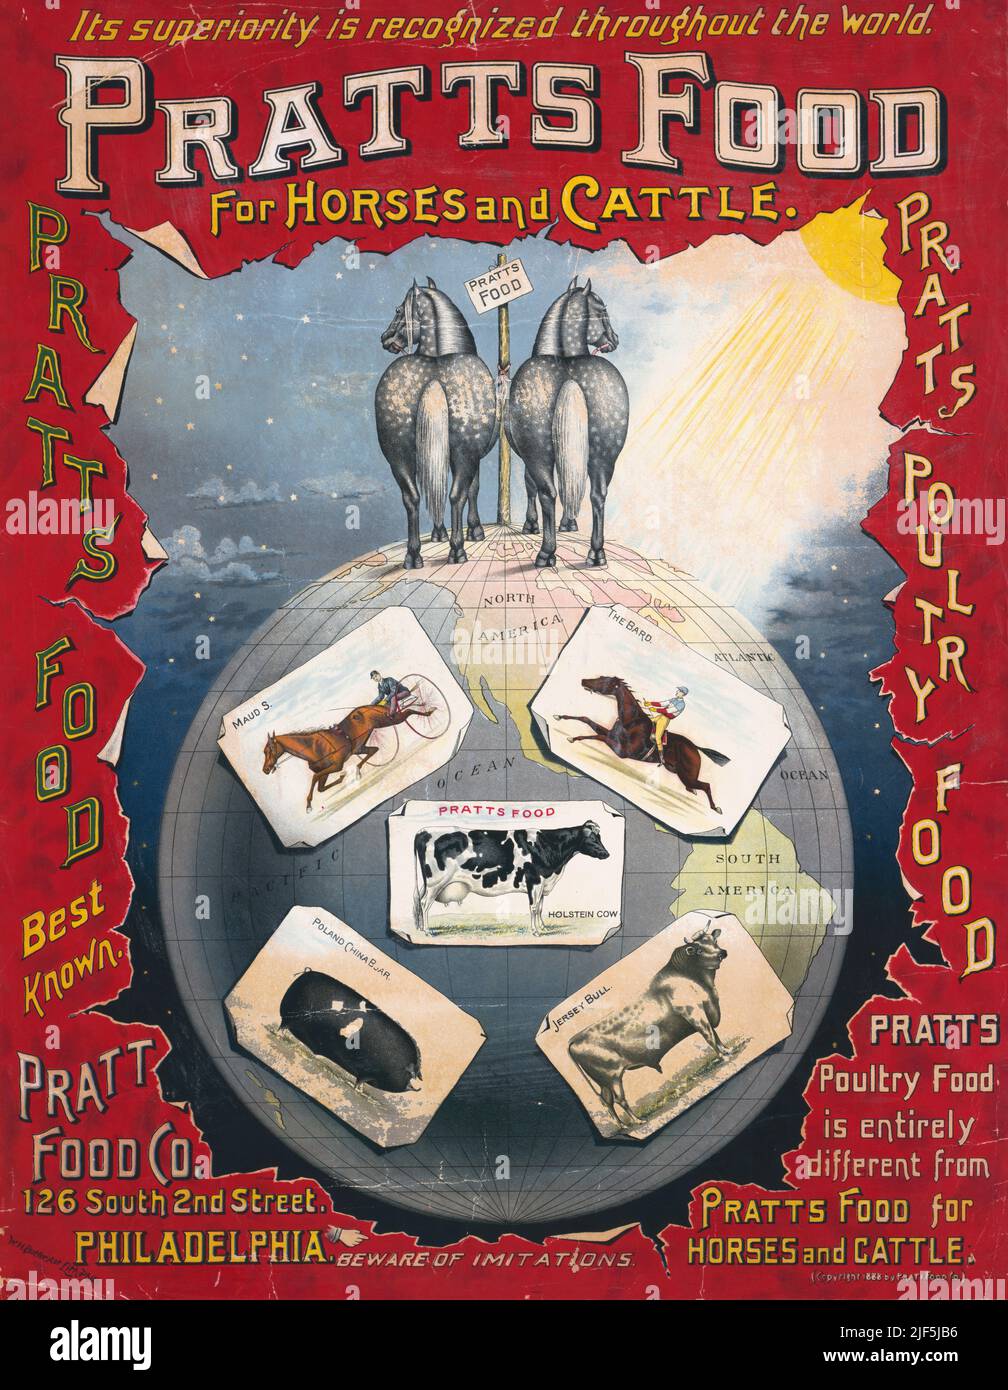 1888 ad for Pratts Food for Horses and Cattle, Philadelphia, Pennsylvania. Lithograph by W. H. Butler. Stock Photo